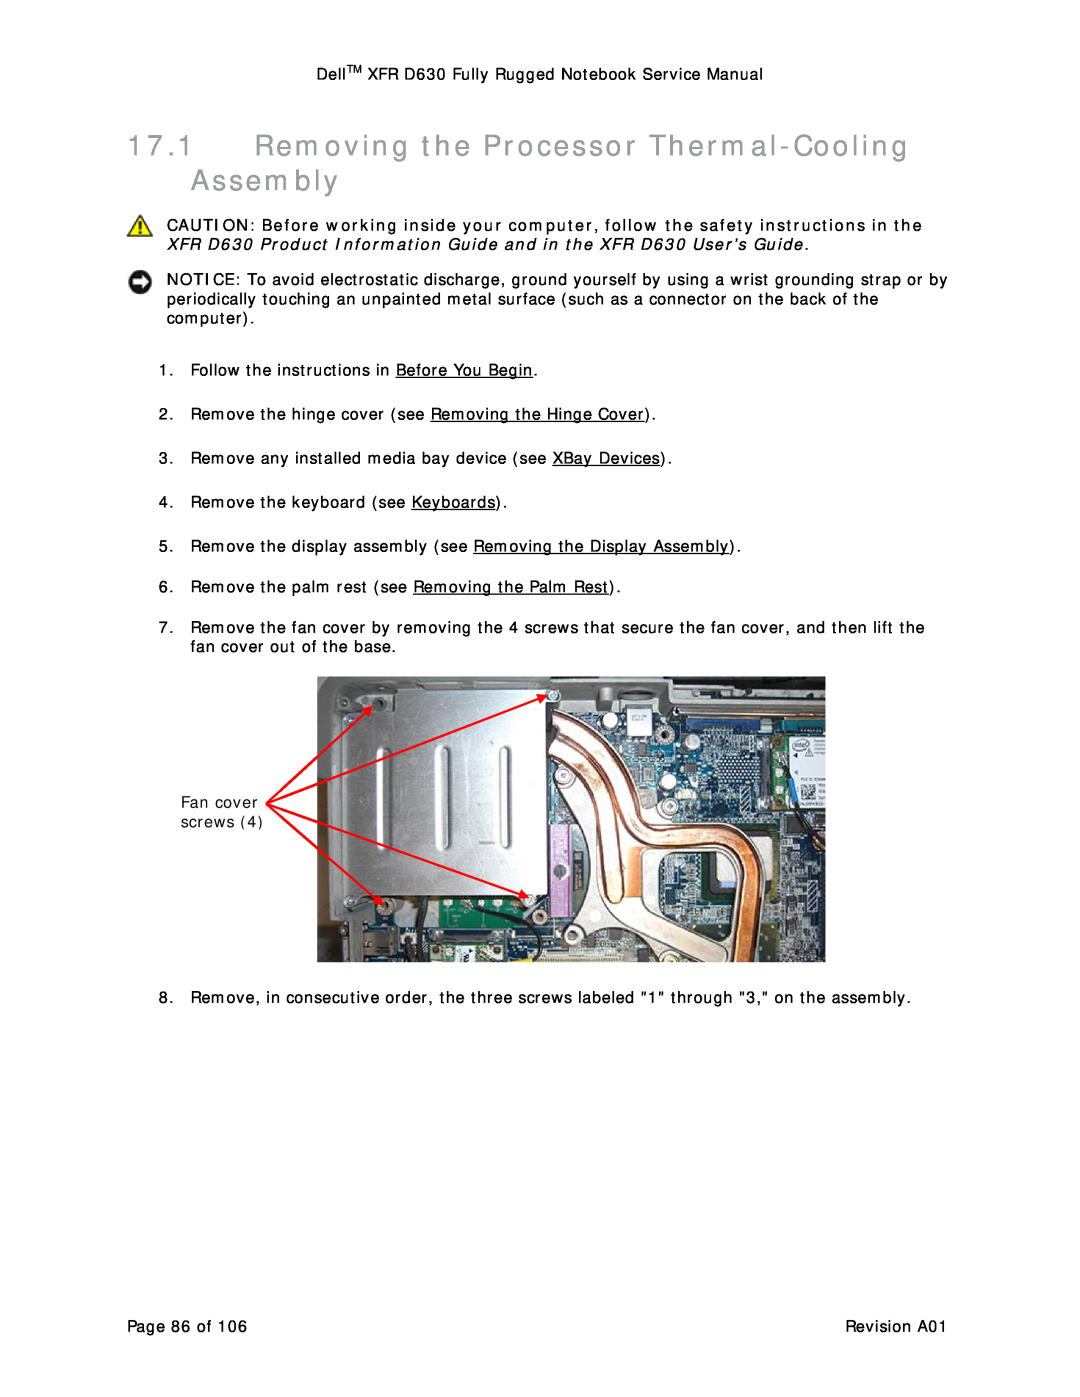 Dell D630 service manual Removing the Processor Thermal-Cooling Assembly 